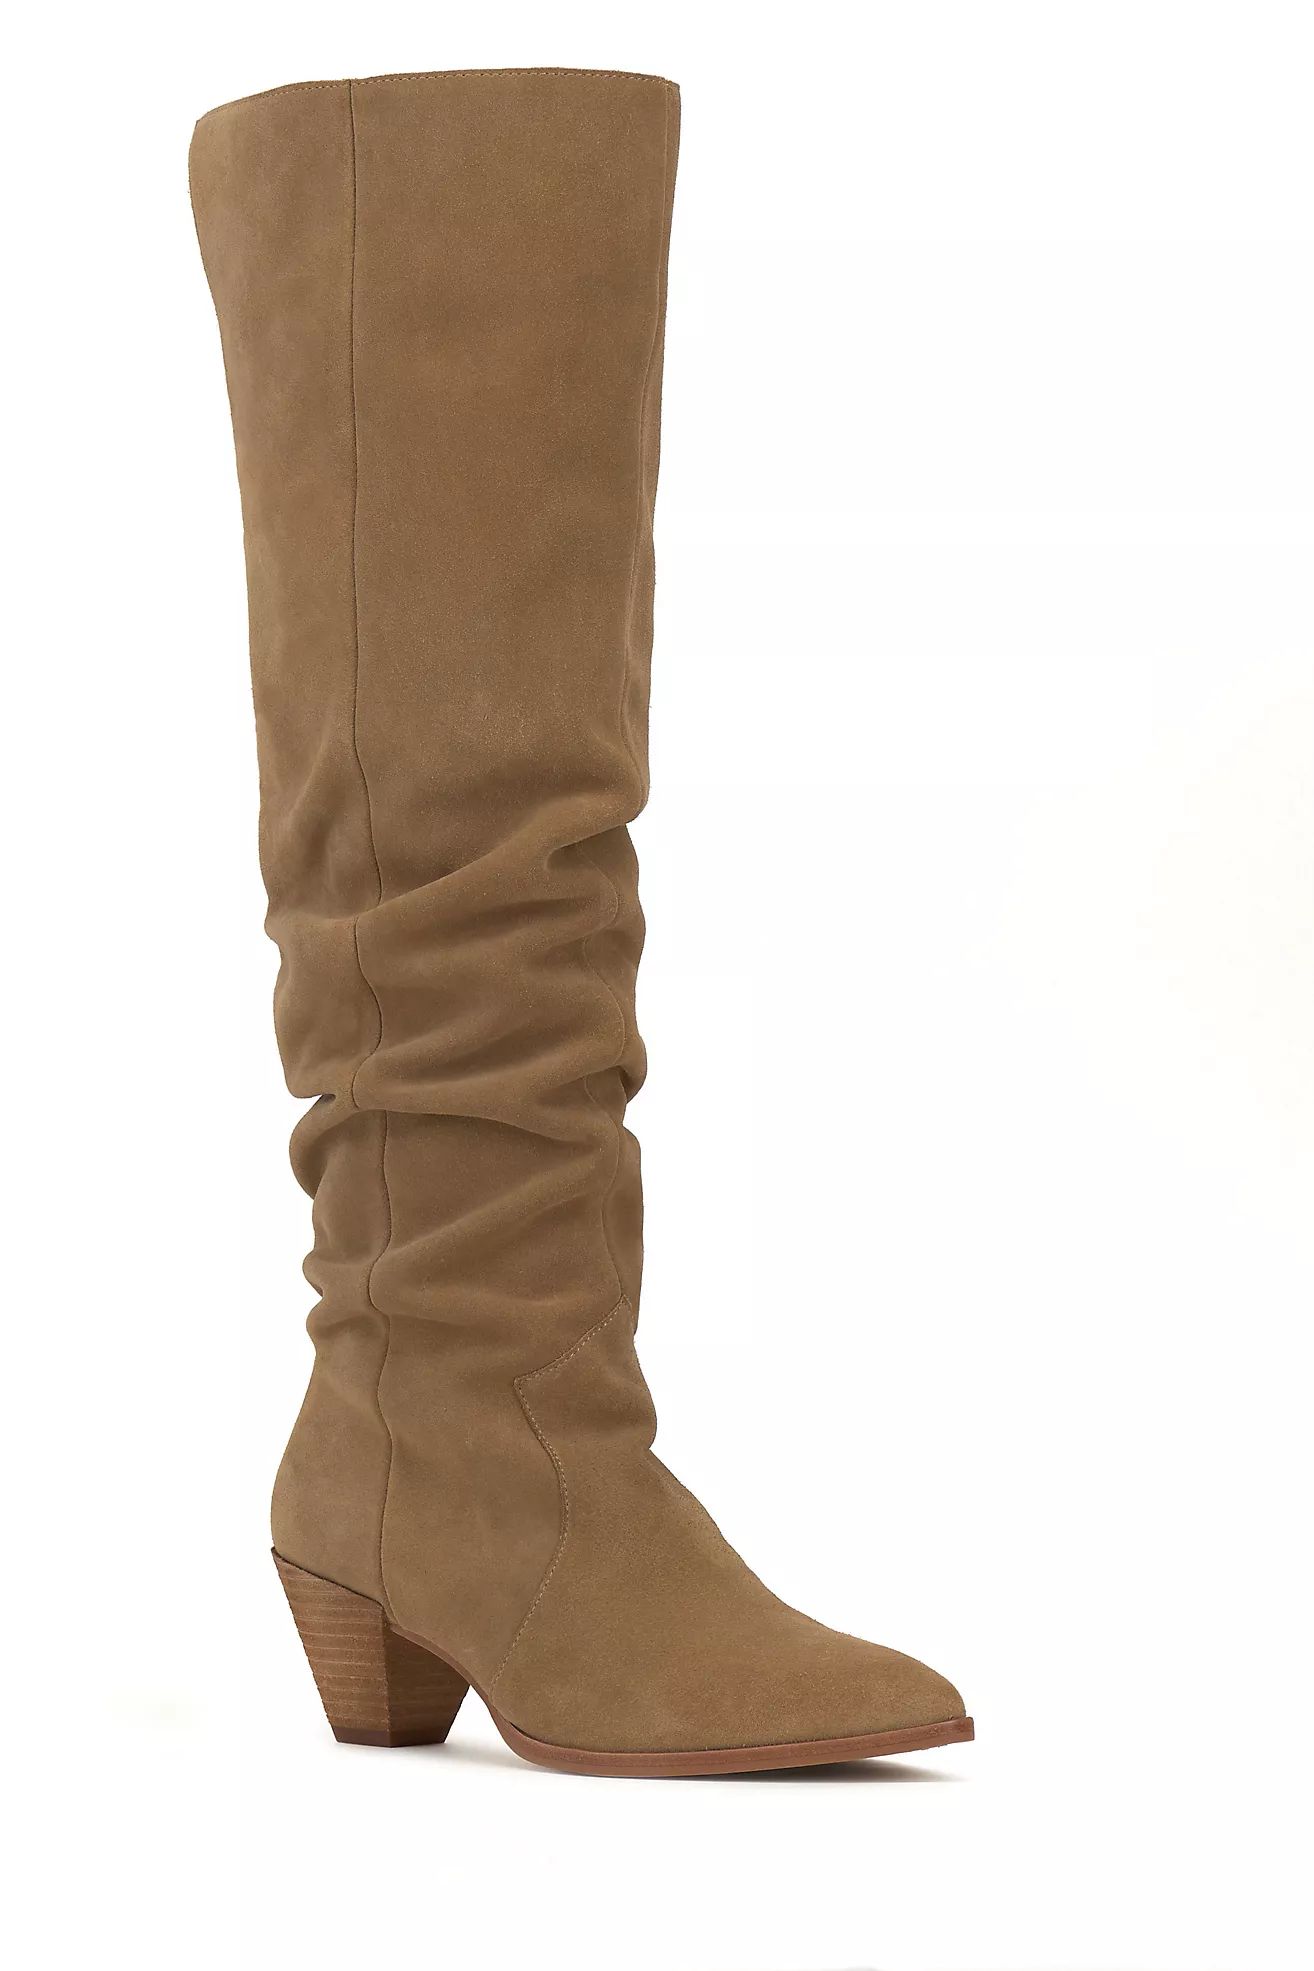 Vince Camuto Sewinny Boots | Anthropologie (US)